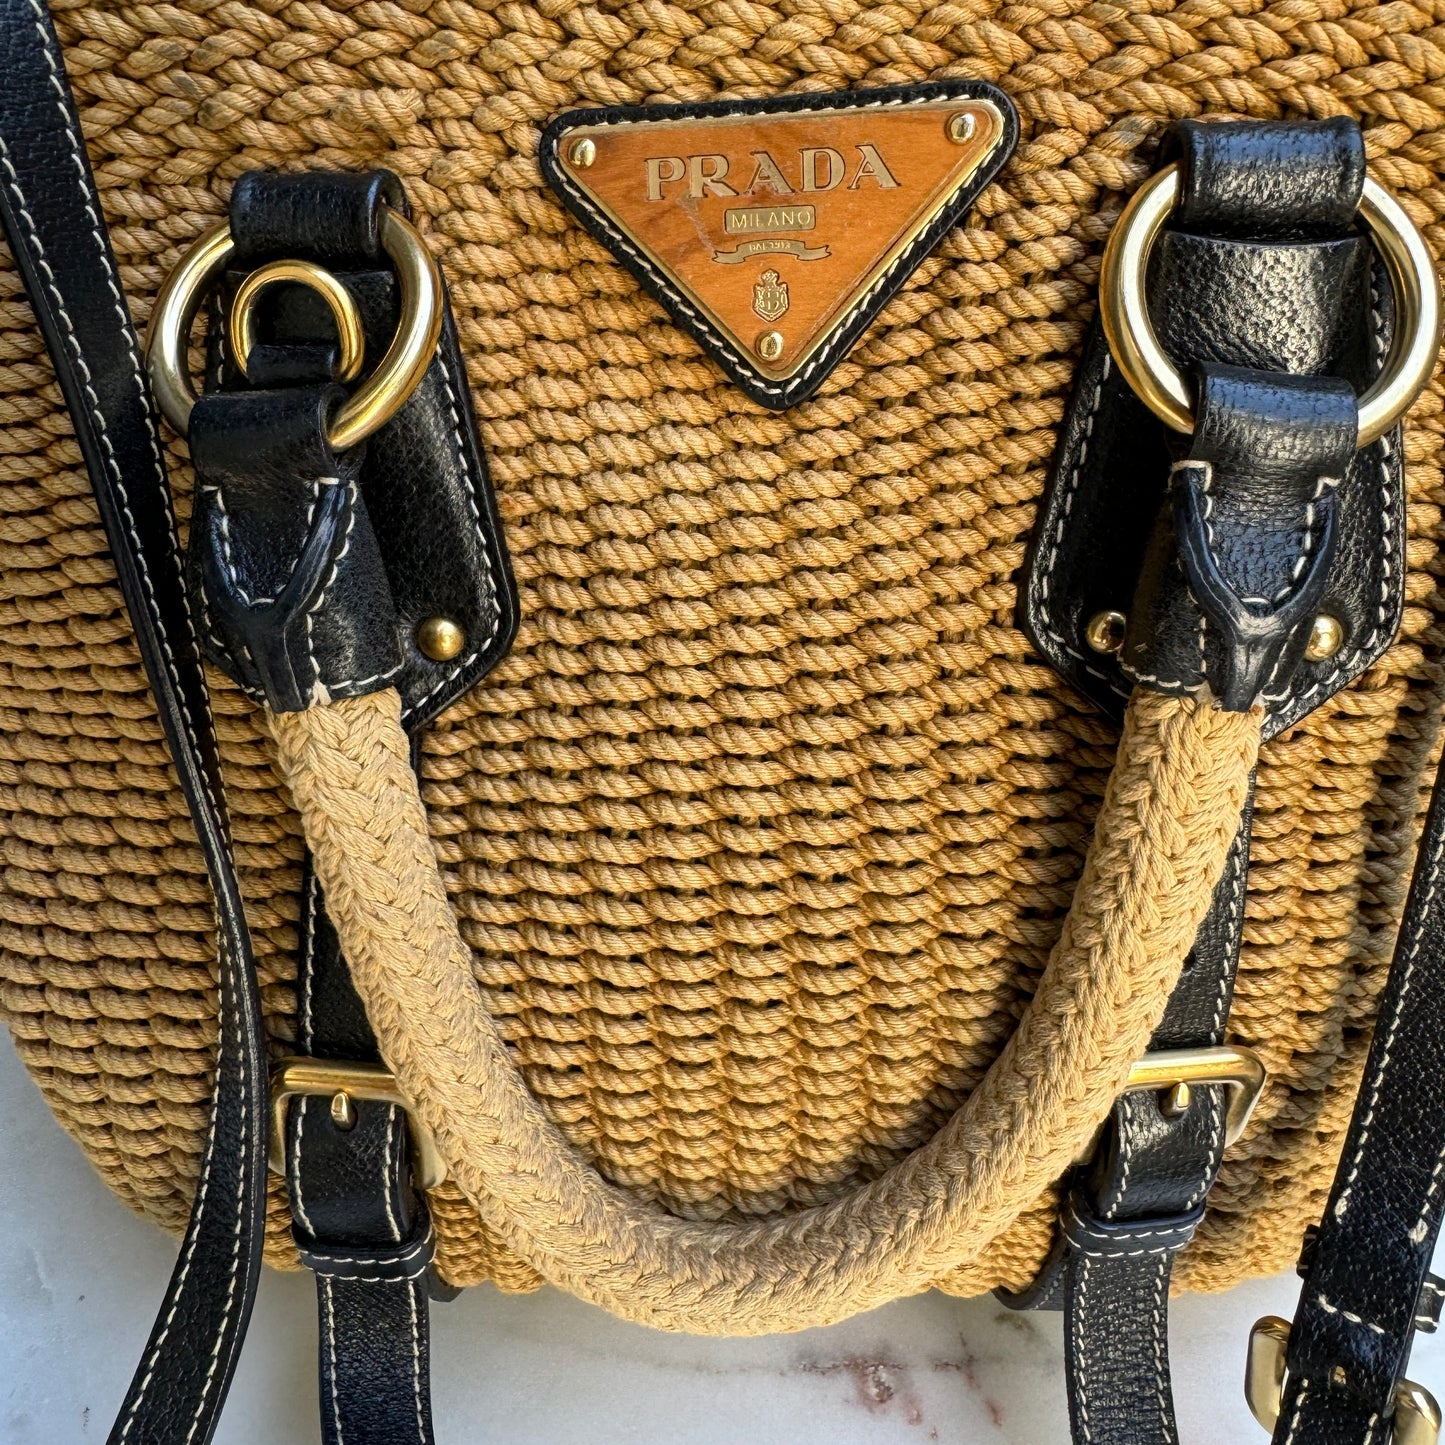 Prada Leather Trimmed Woven Rope Tote